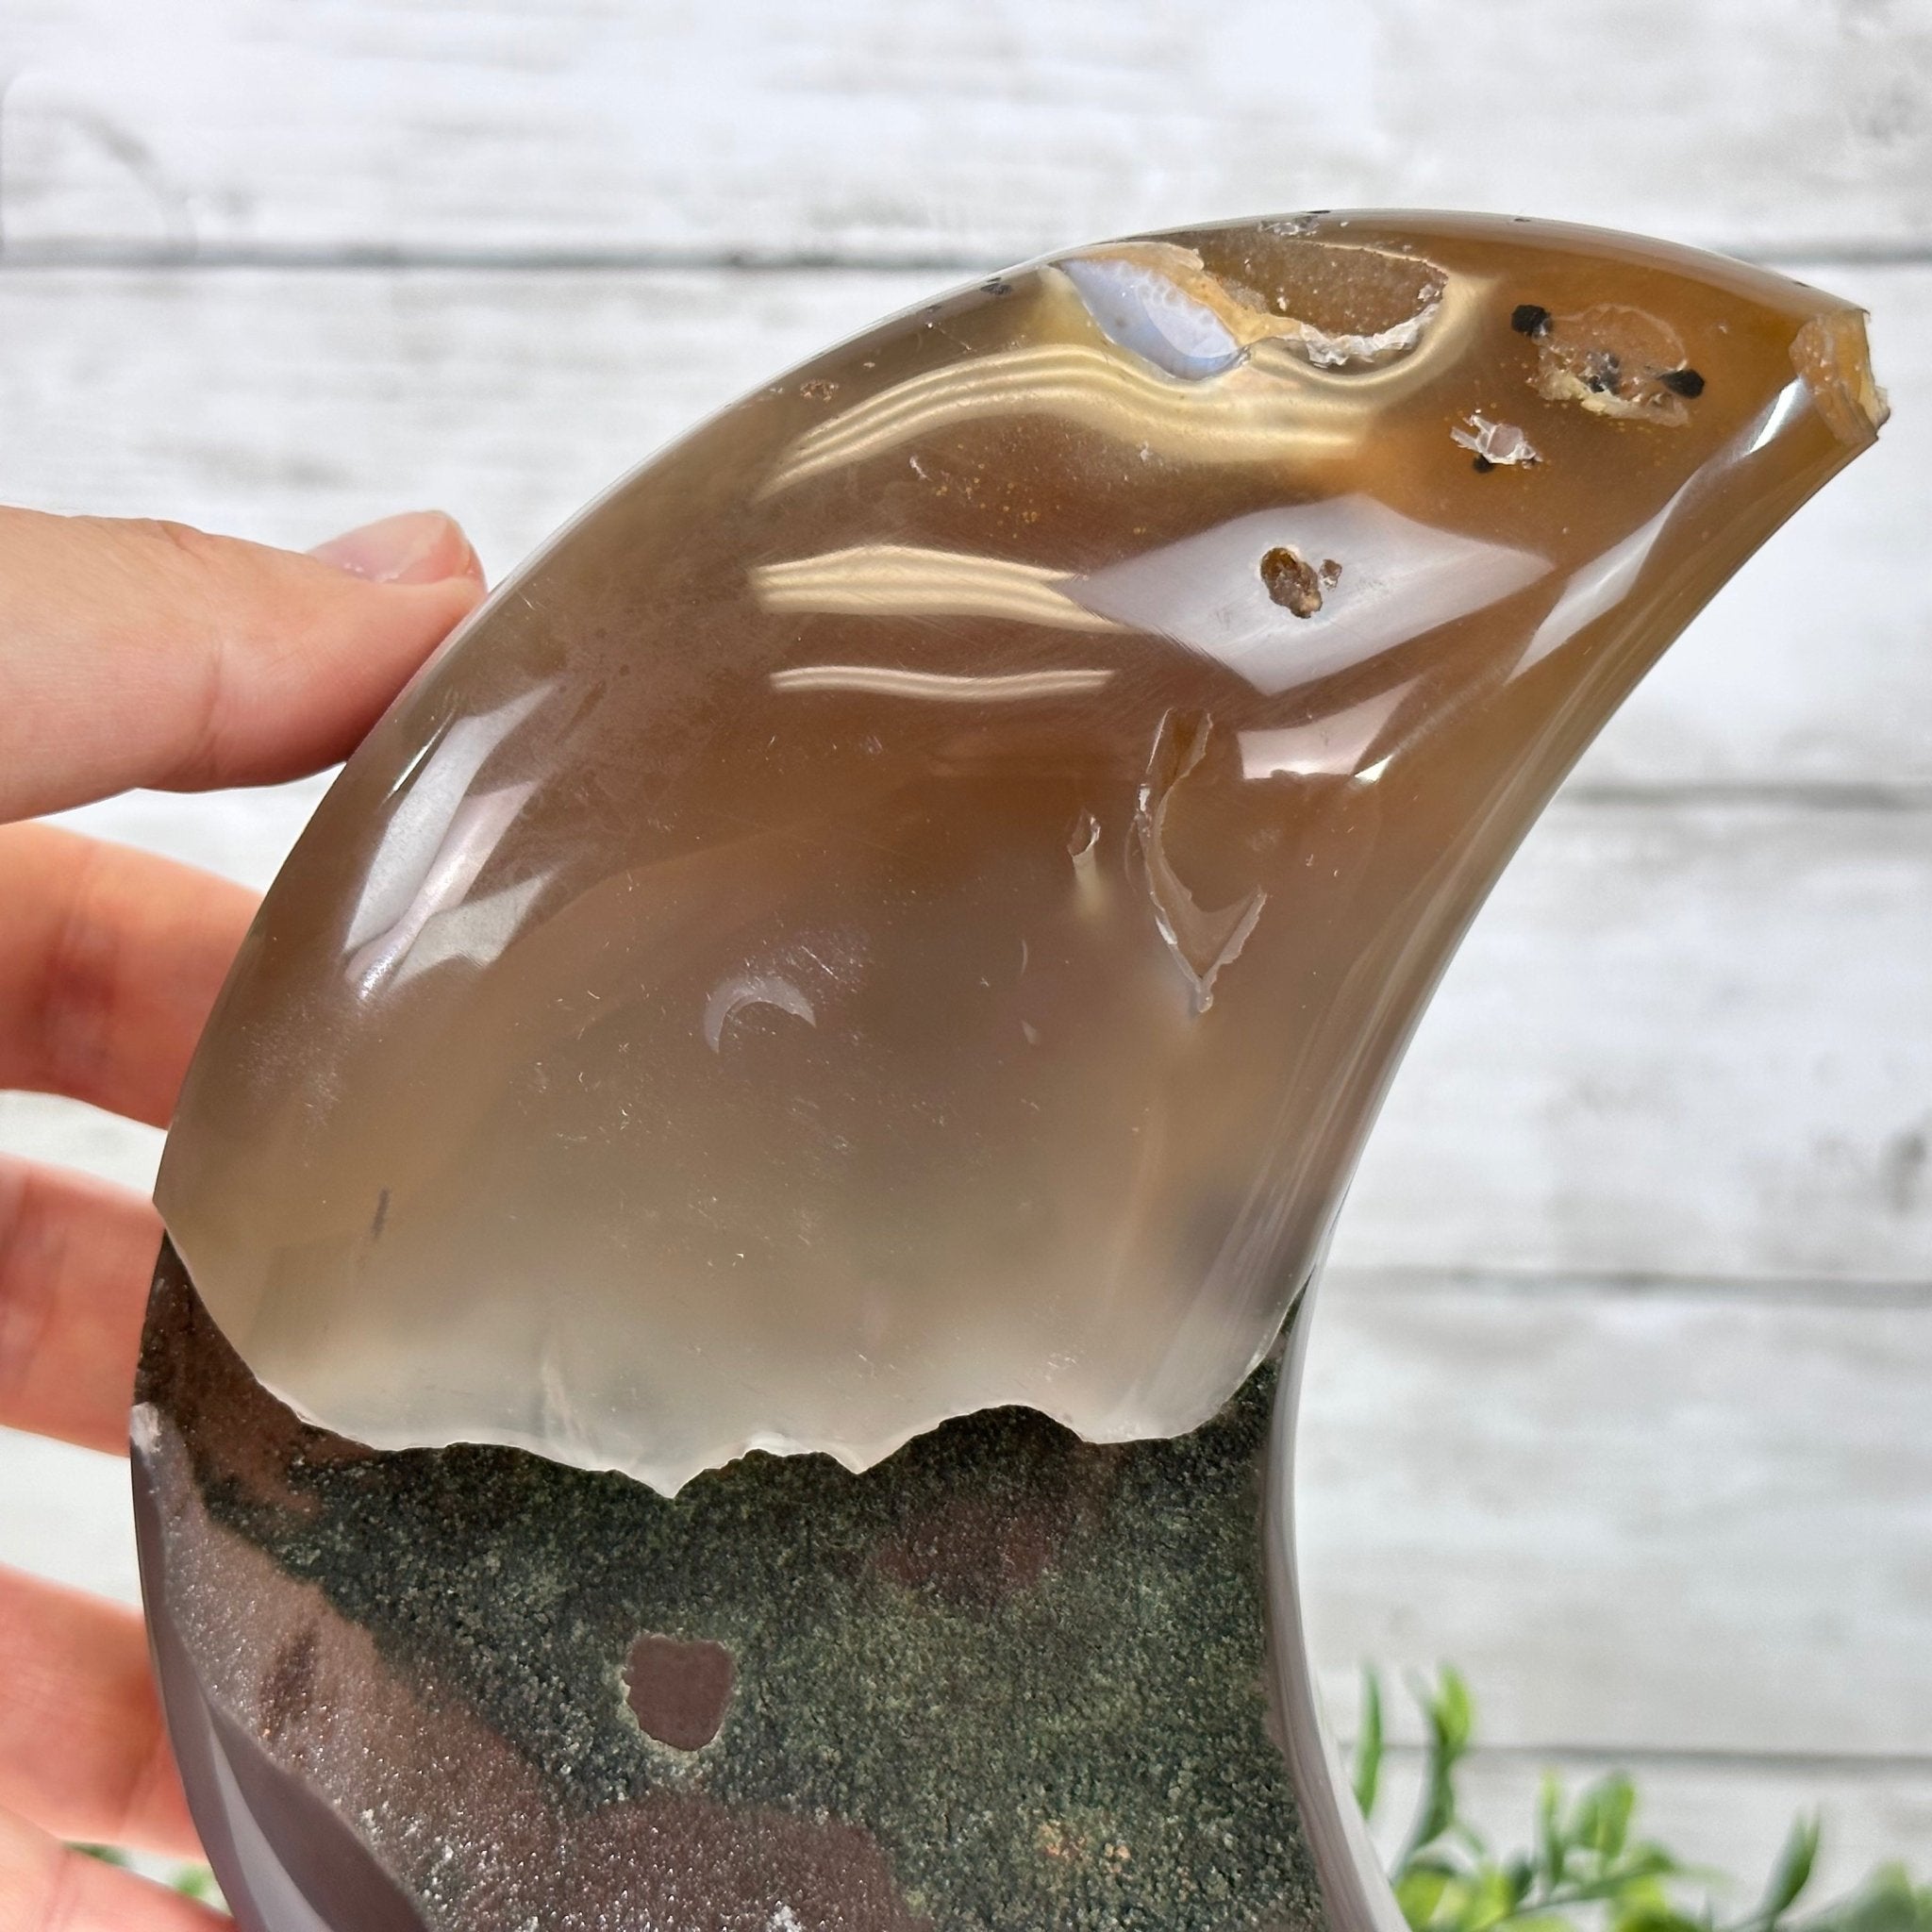 Polished Agate Crescent Moon on a Stand, 3.3 lbs & 10.25" Tall #5740NA-002 by Brazil Gems - Brazil GemsBrazil GemsPolished Agate Crescent Moon on a Stand, 3.3 lbs & 10.25" Tall #5740NA-002 by Brazil GemsCrescent Moons5740NA-002